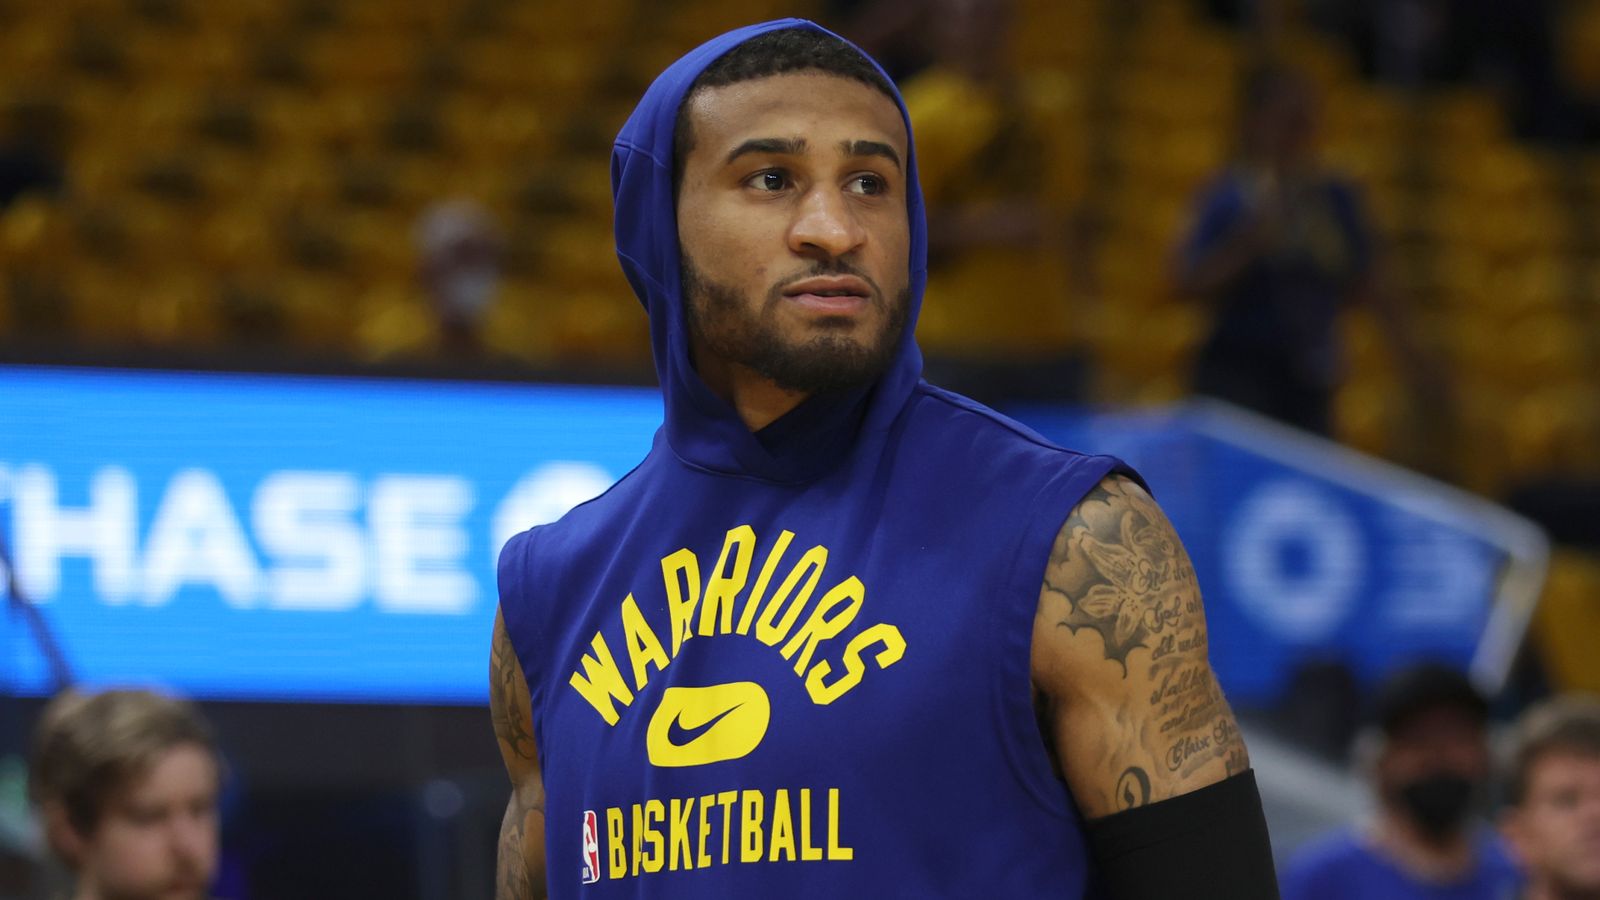 Gary Payton II out at least a month as Warriors await trade